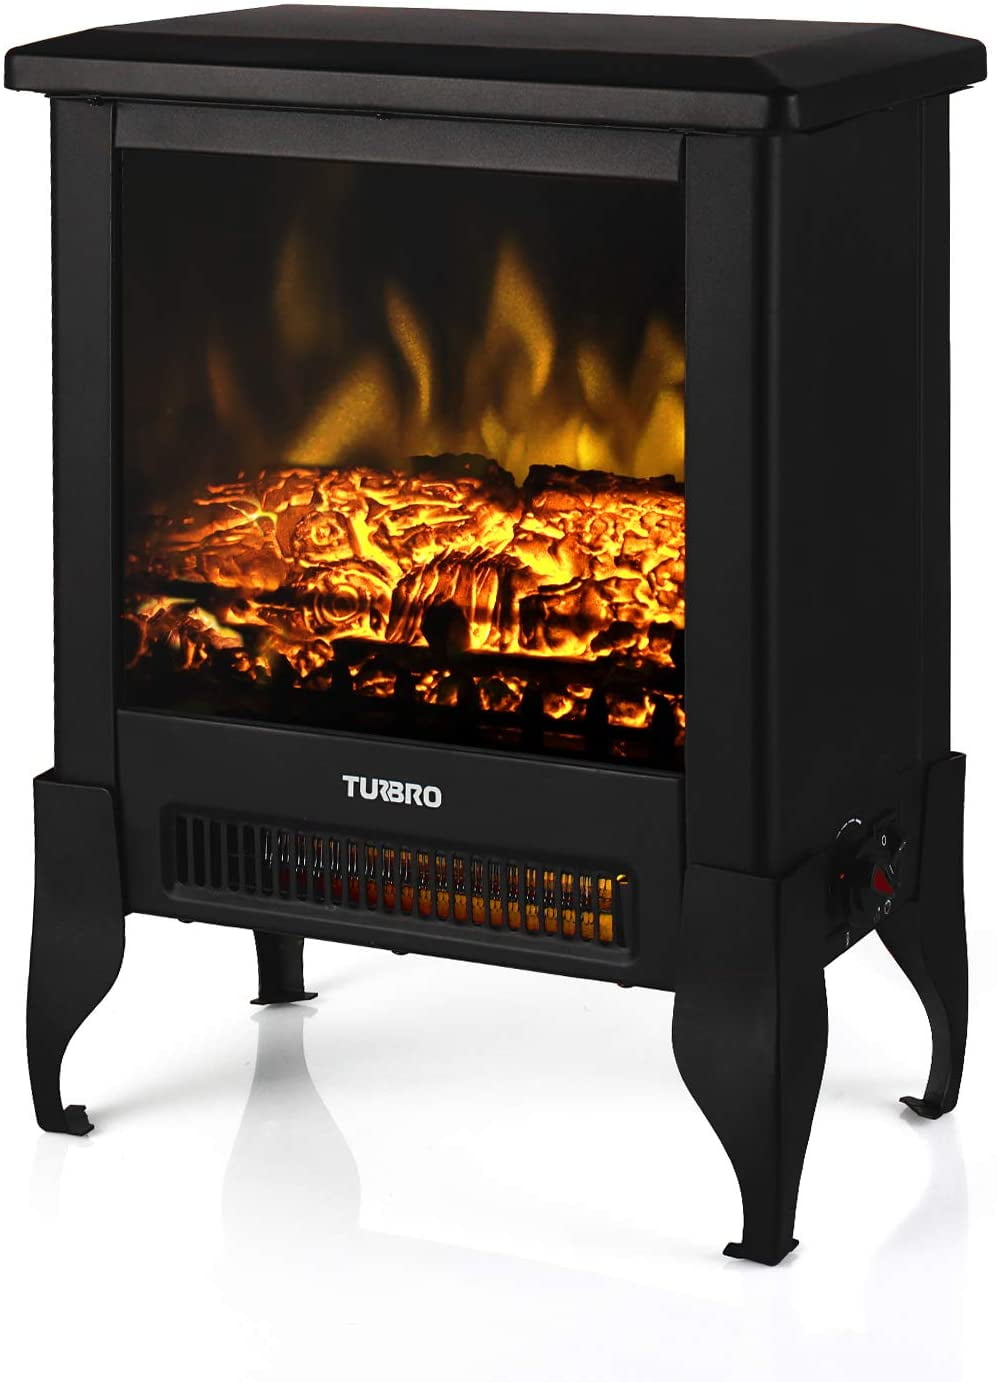 Turbro Suburbs Ts17 Compact Electric, Best Realistic Freestanding Electric Fireplace